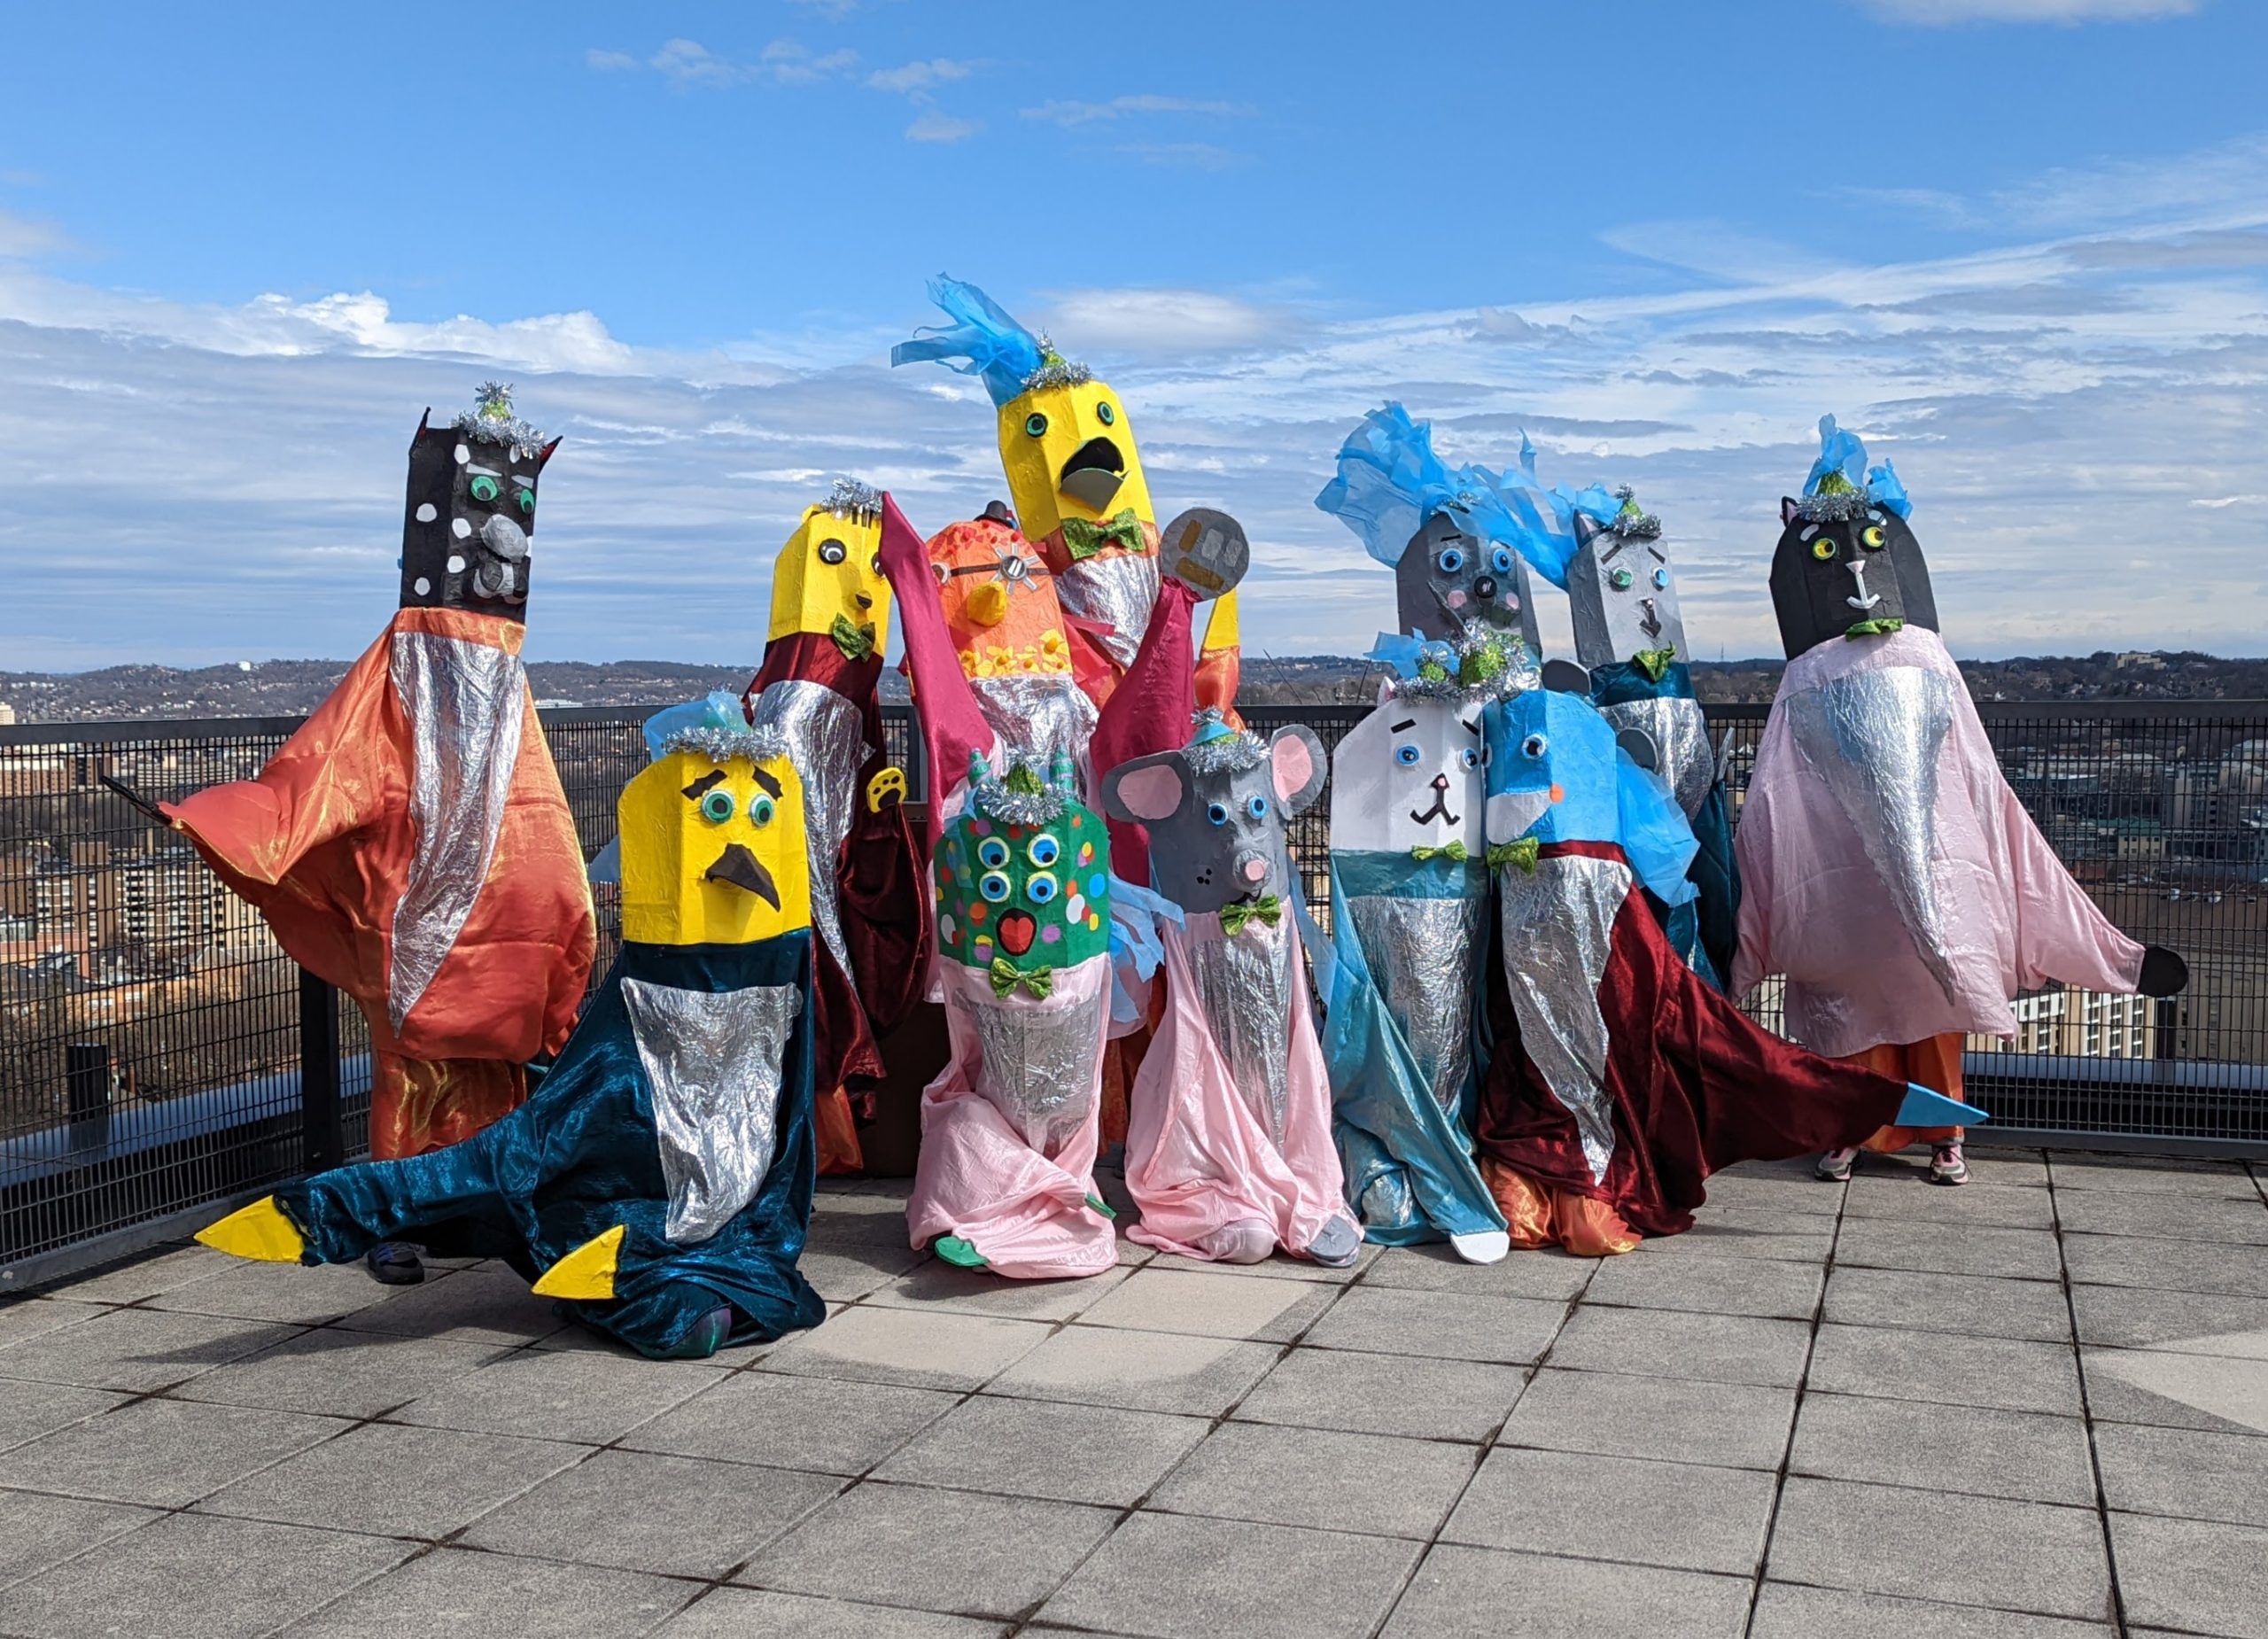 Colorful giant puppets pose for a picture on a rooftop with a bright blue sky background.